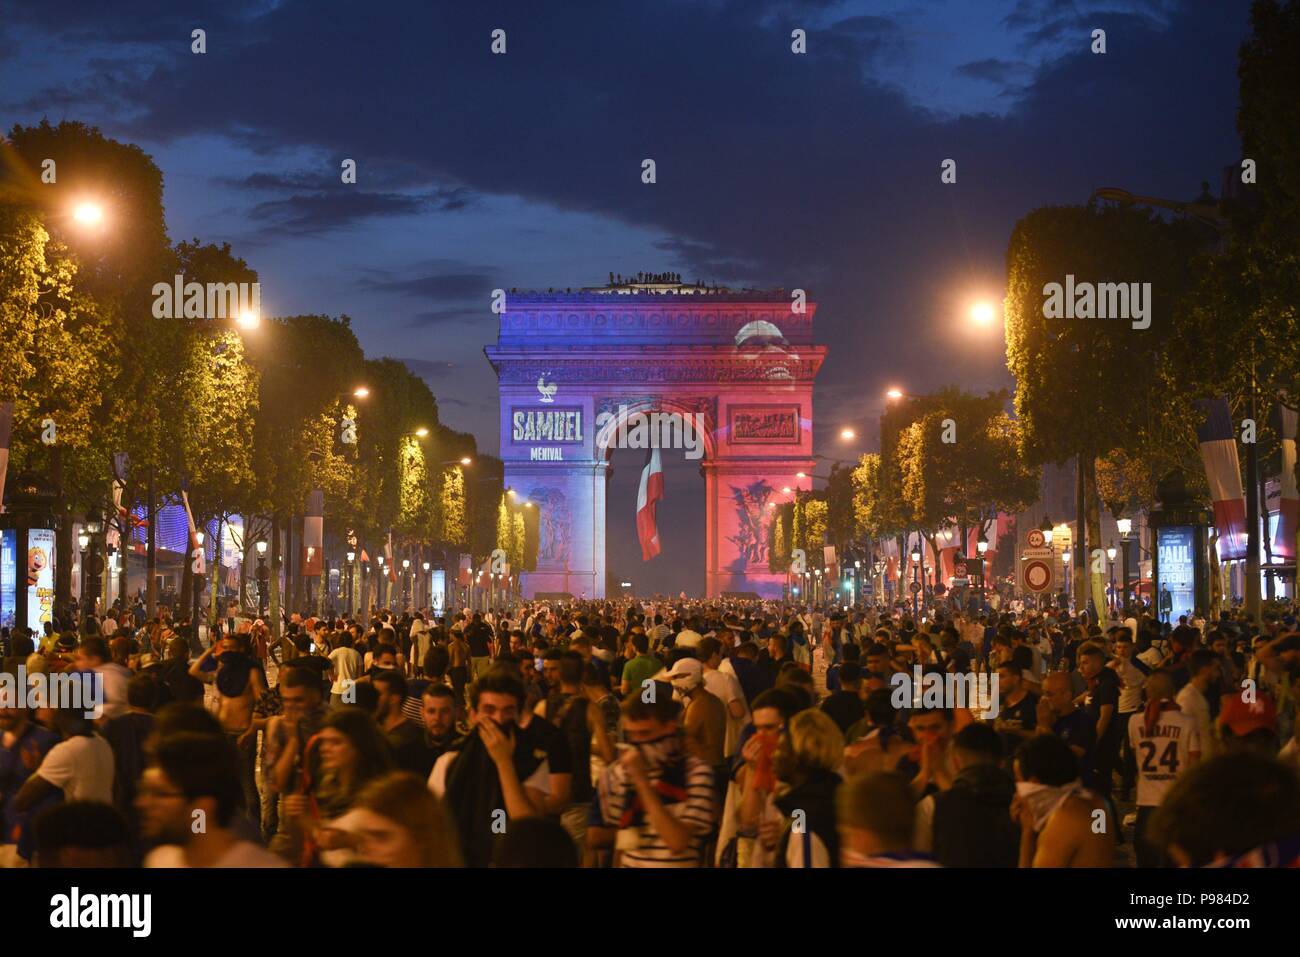 Paris France 15th July 18 French Celebrate On The Champs Elysees Avenue After France Won The World Cup By Beating Croatia 4 2 In The Final Liesse Sur L Avenue Des Champs Elysees Apres La Victoire